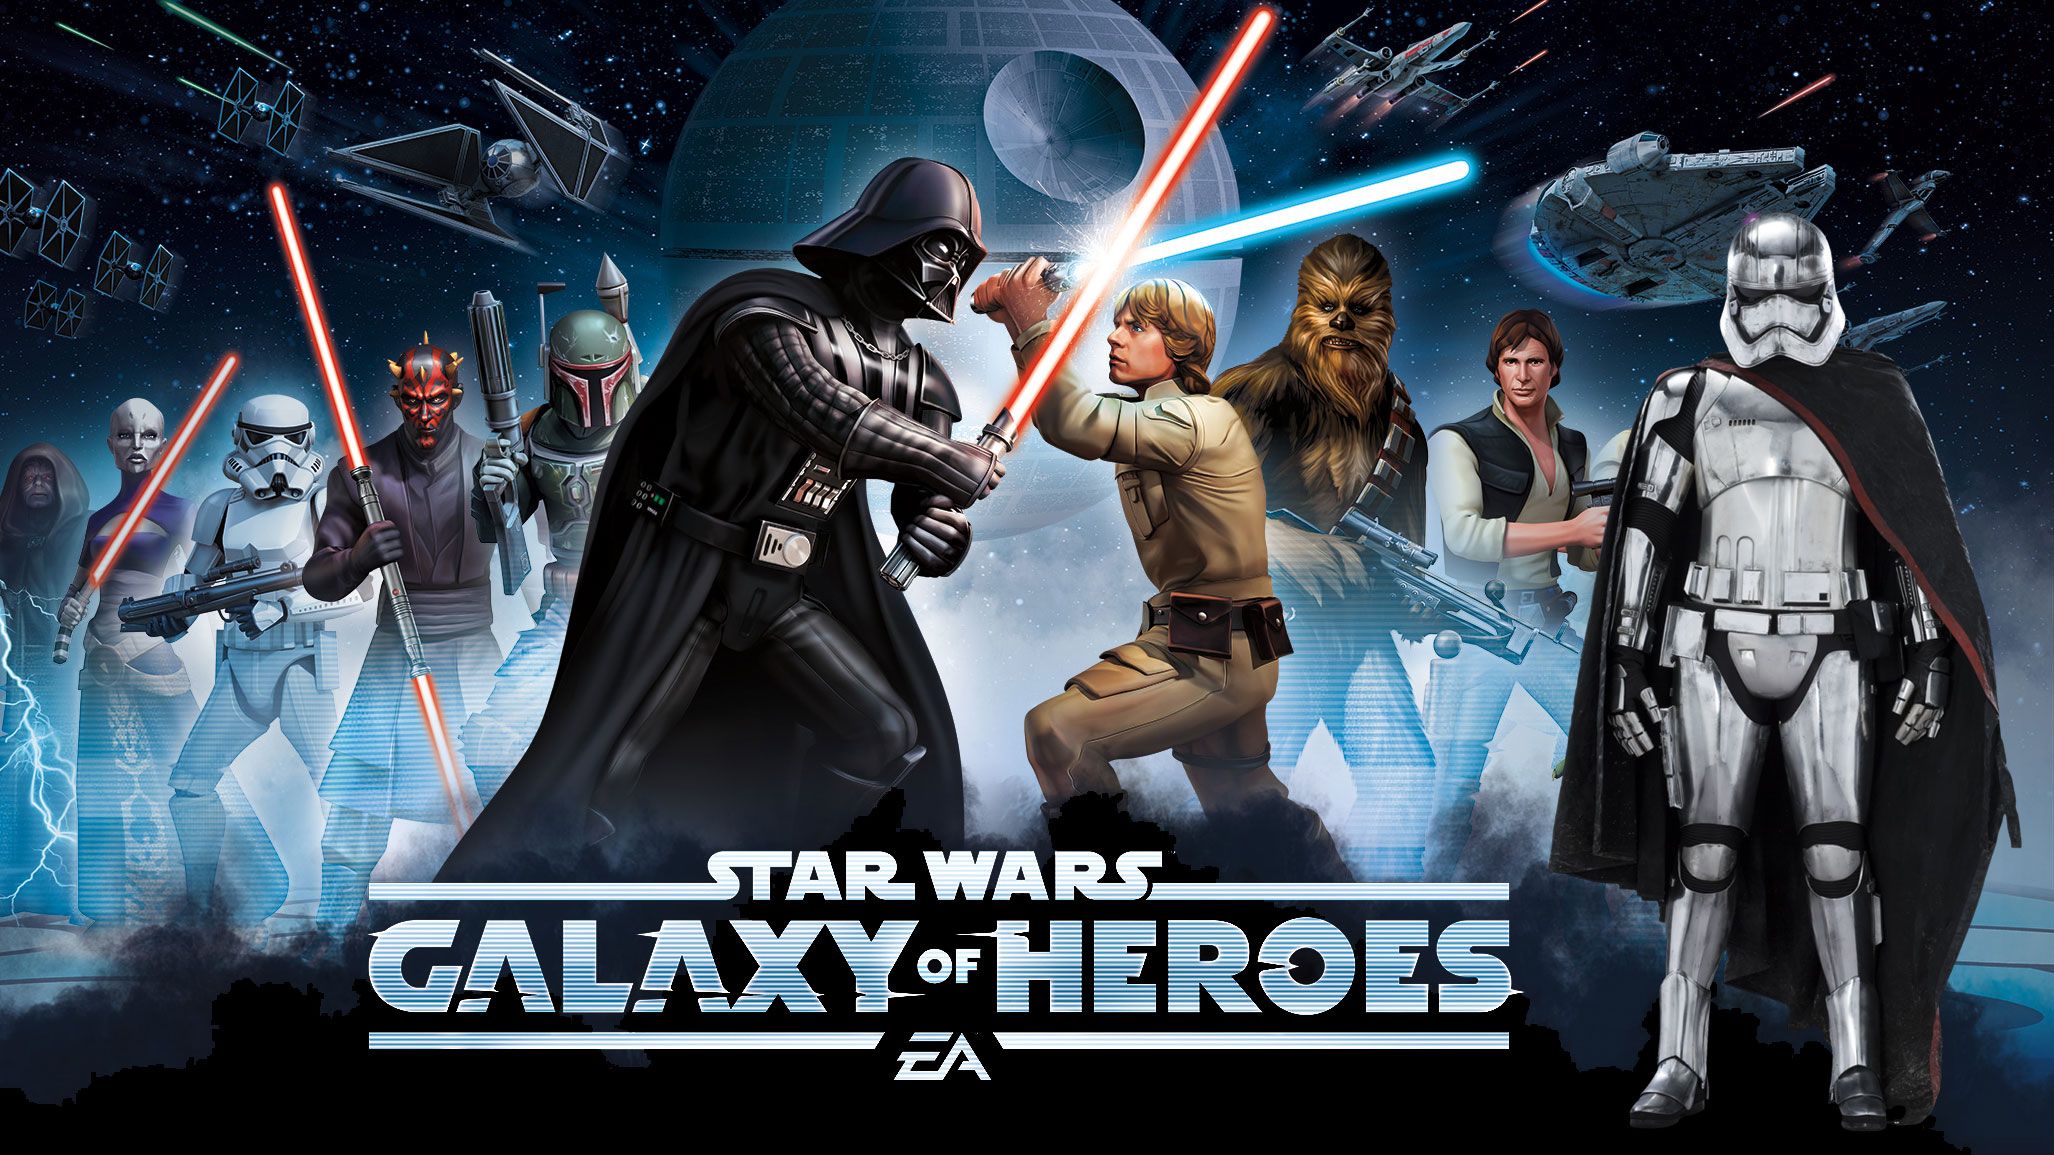 The Force Awakens Come to Star Wars: Galaxy of Heroes